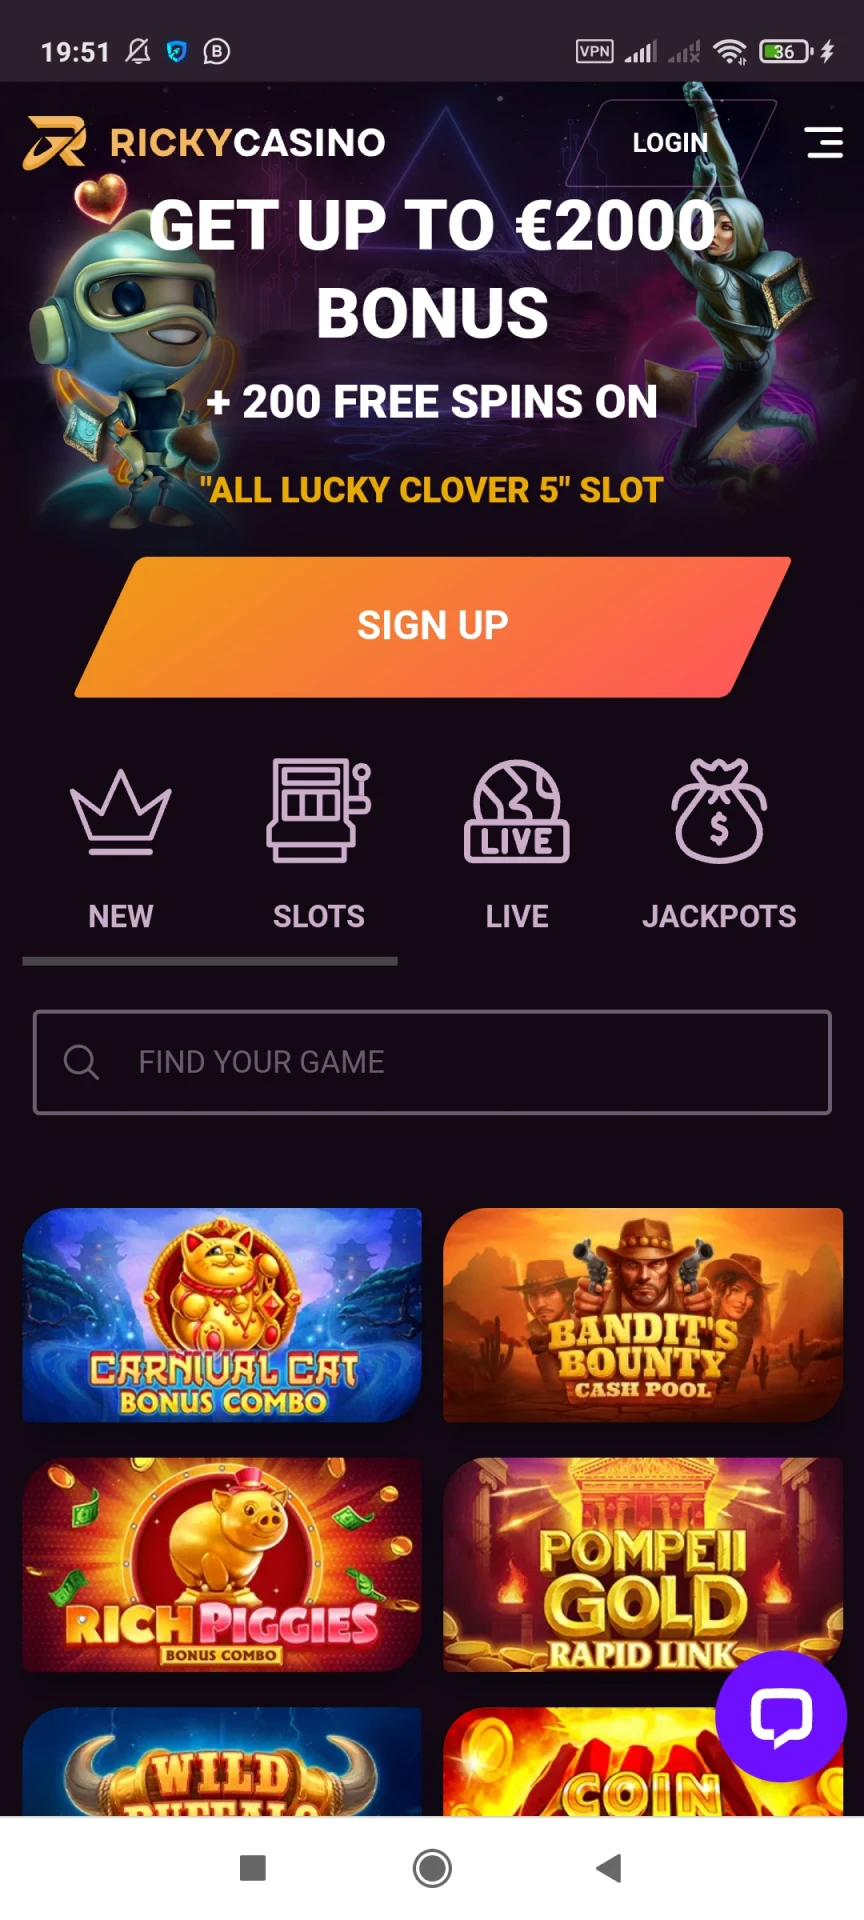 Visit the home page of the Ricky Casino app.